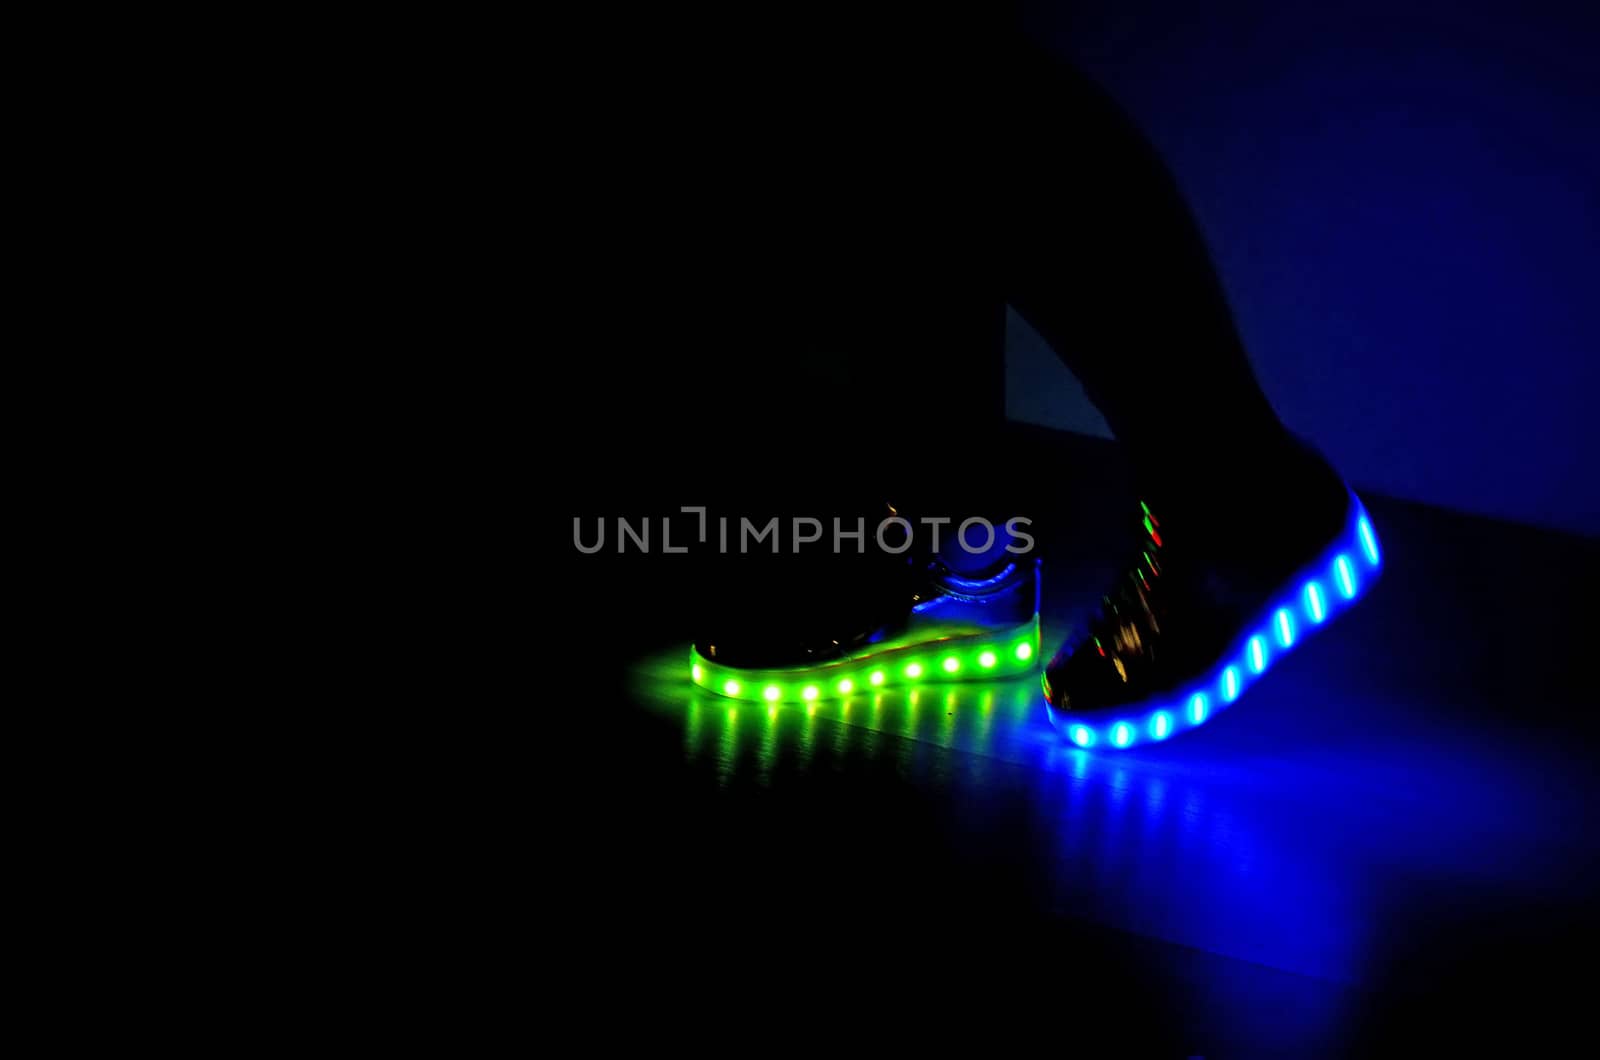 Fashionable sneakers with neon LED lighting on the legs of a girl with green and blue colors in the dark .Different colors of neon lights soles sneakers are present.